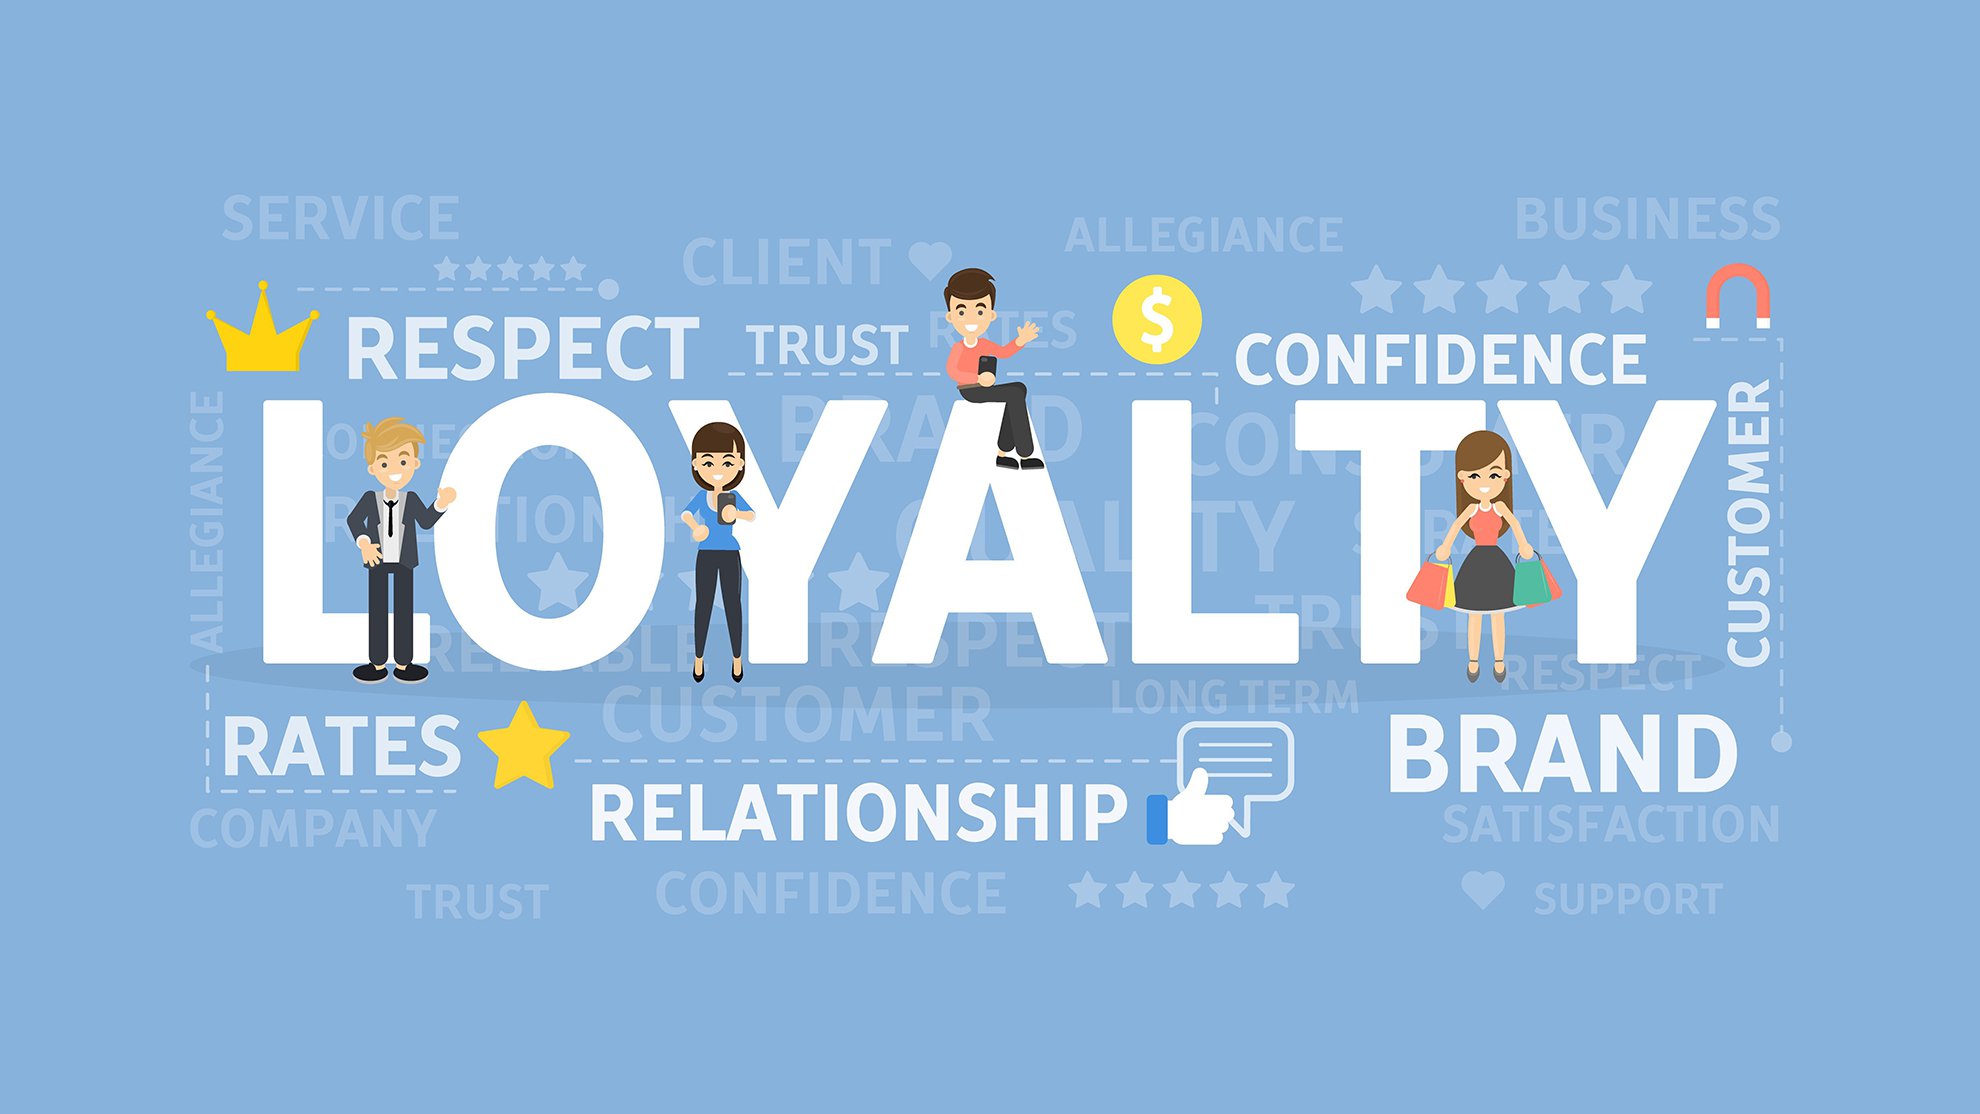 4 Best Practices for Customer Experience & Brand Loyalty